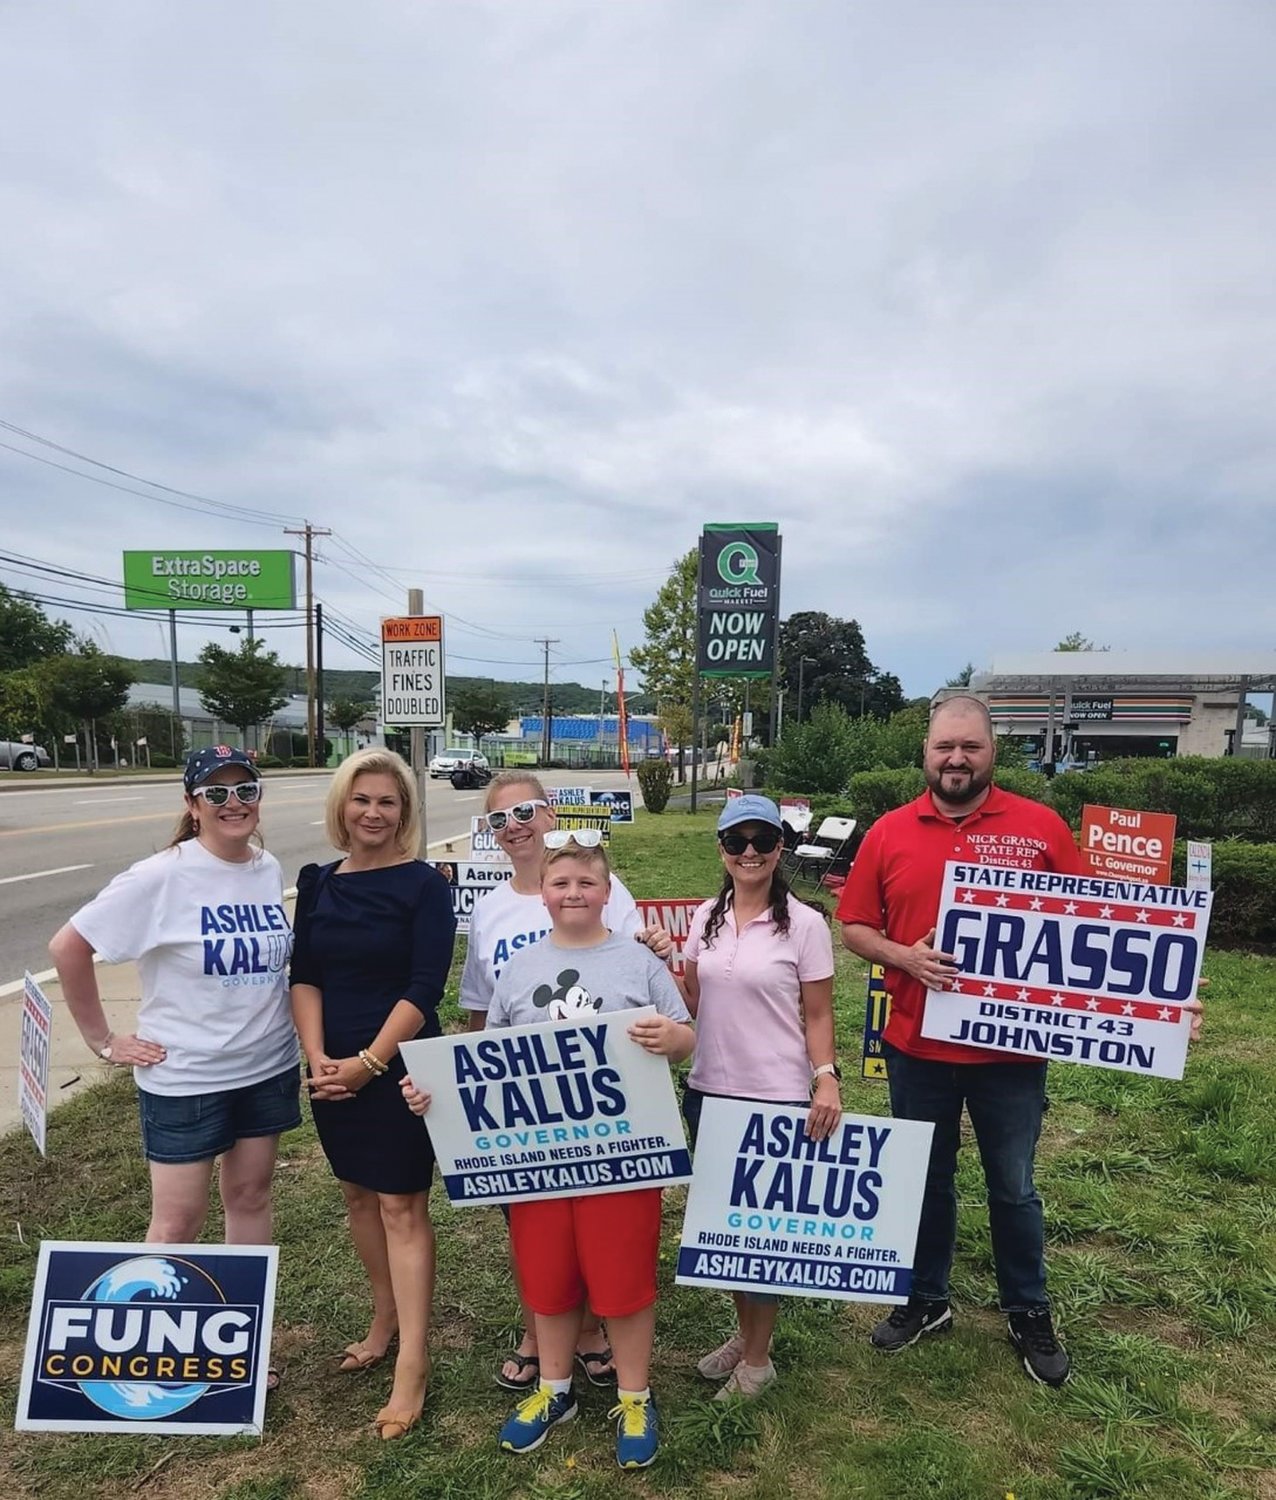 MEET & GREET: Supporters and candidates, from left to right, Laura Colannino (NFRW), Ashly Kalus, Stephanie Calise (NFRW), Susi Simpson (JRTC), and Nick Grasso.